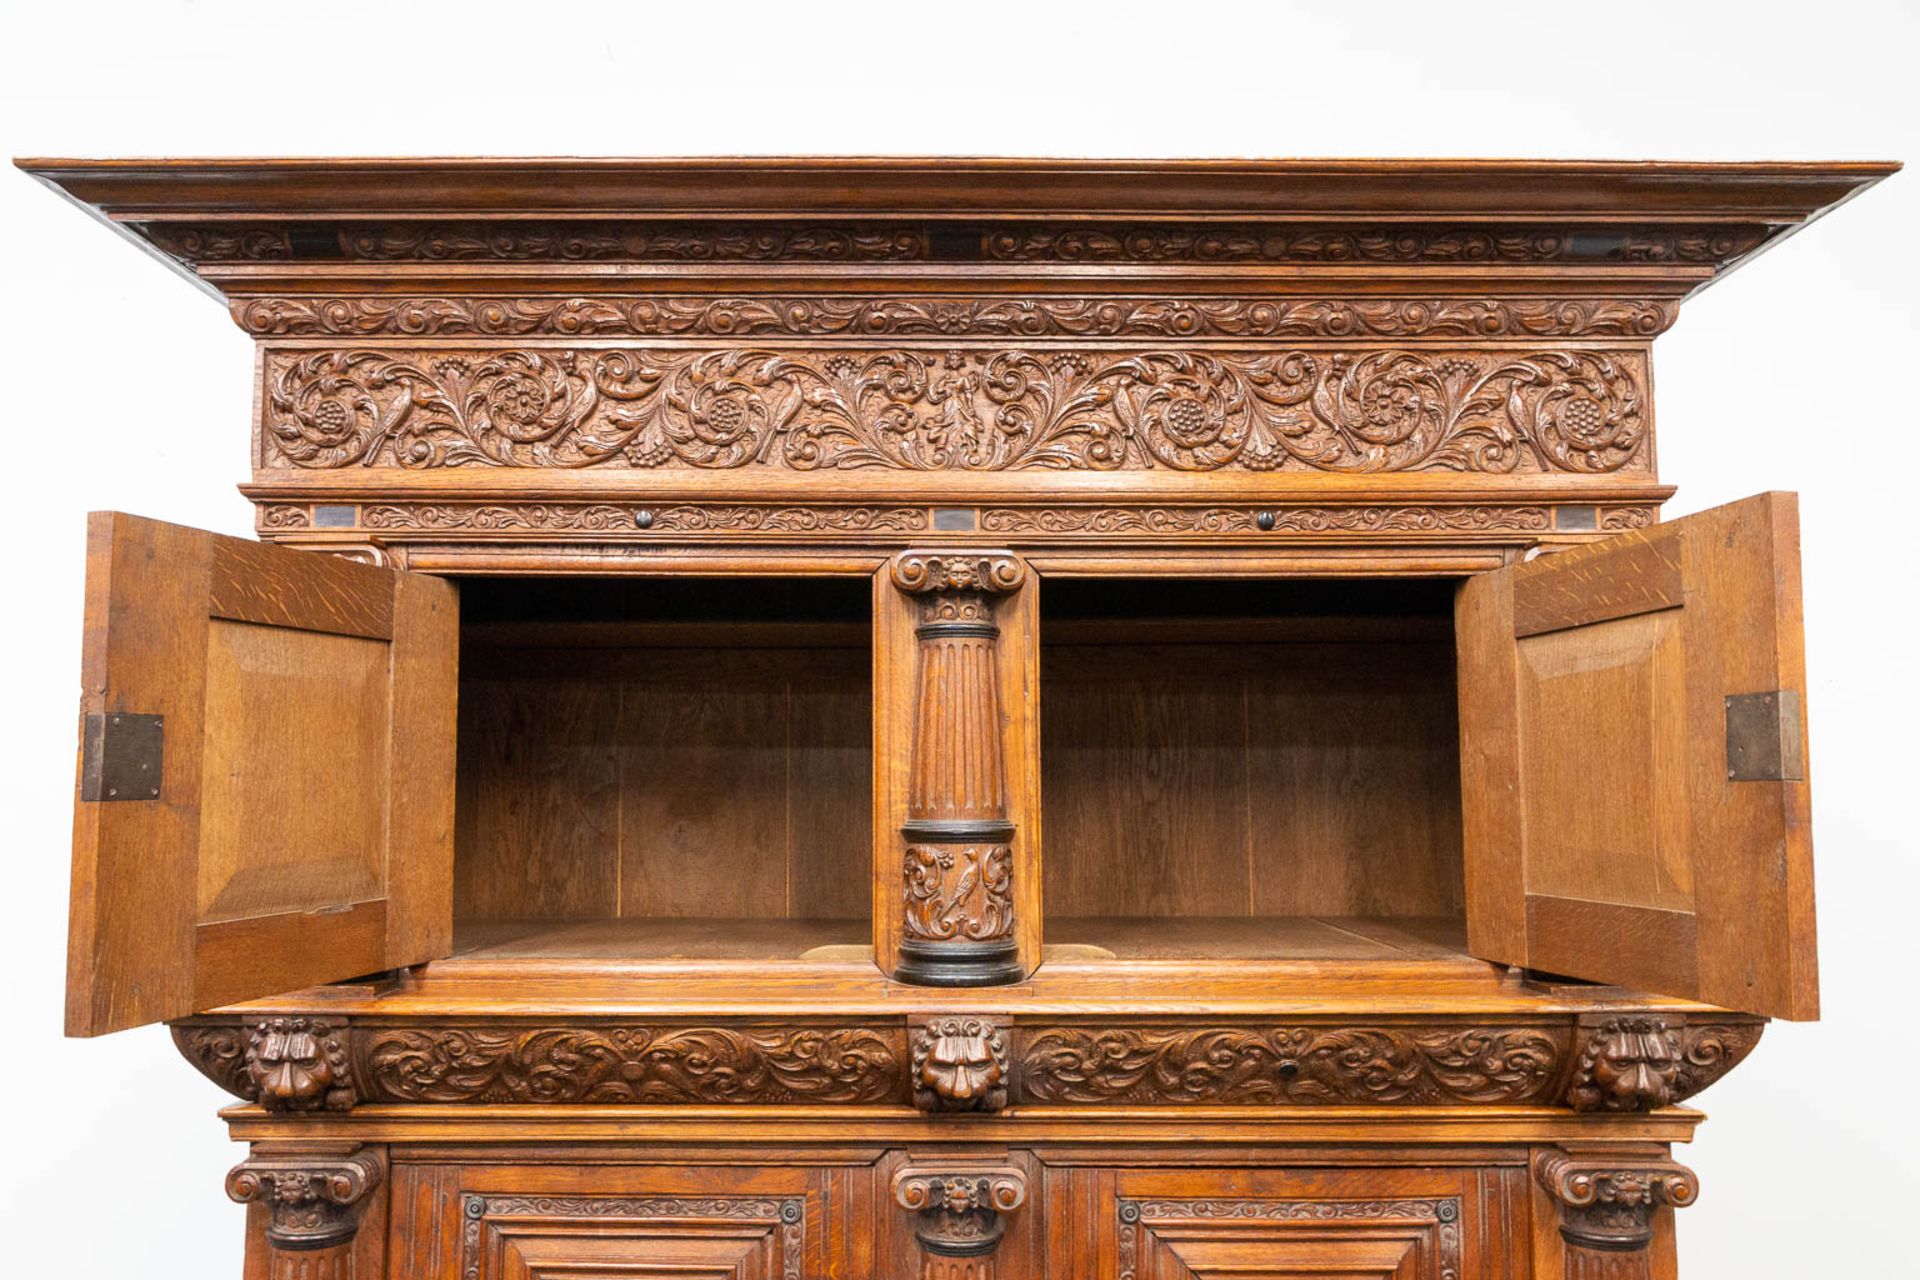 A cabinet, made in Flemish renaissance style, oak with fine sculptures, 19th century. - Image 11 of 27